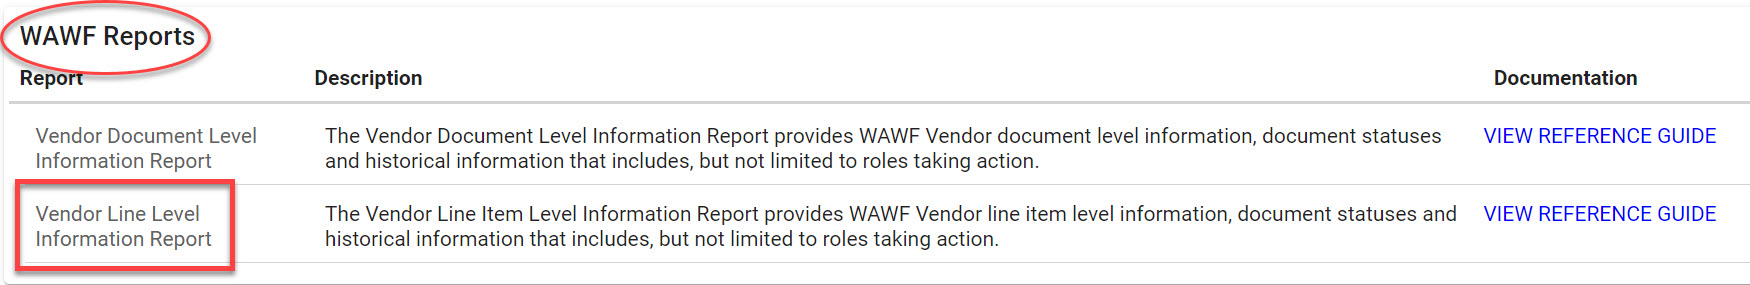 The image provides a preview of the Vendor Line Level Information Report Date Fields Overview.